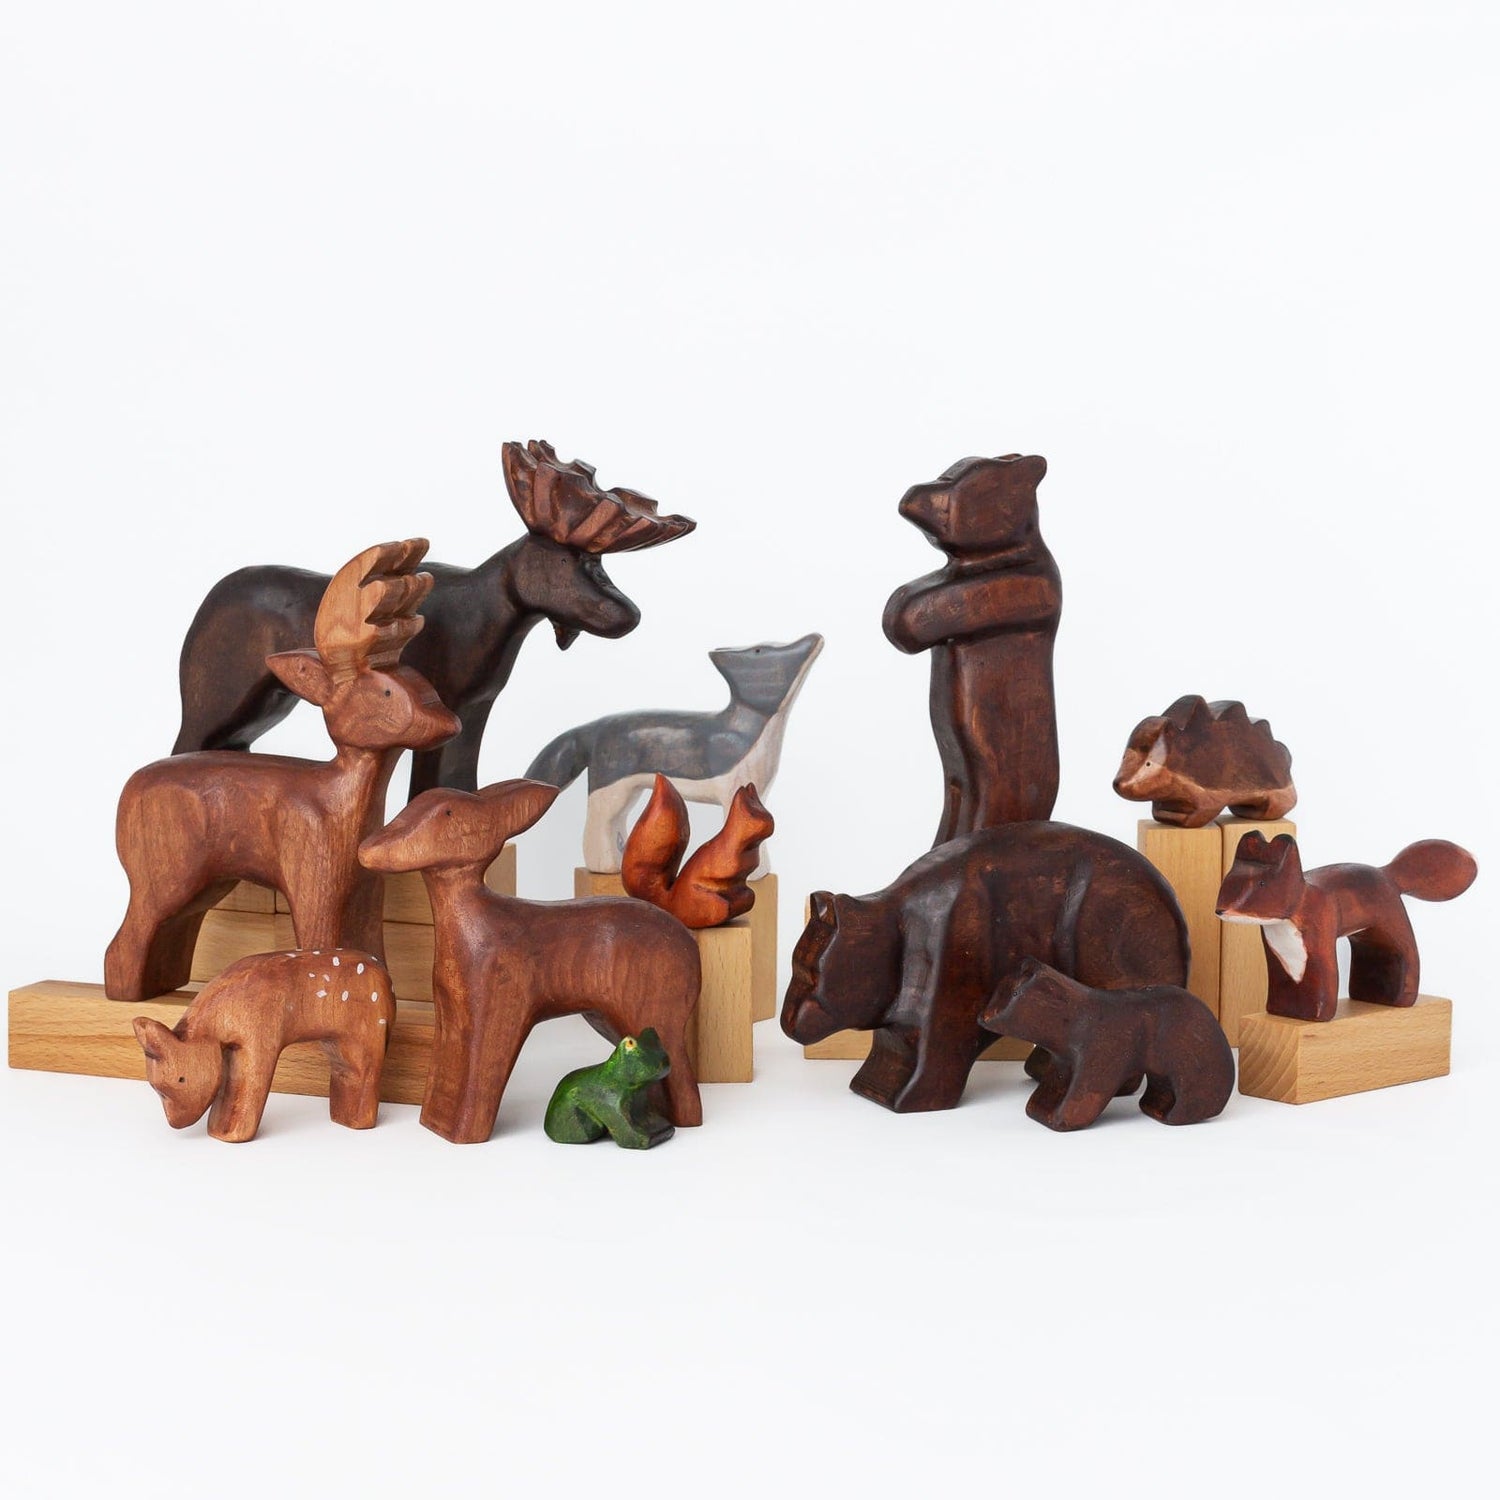 Bumbleberry Toys Wooden Animals "Benjamin Bear" Wooden Animal Toy (Handmade in Canada)